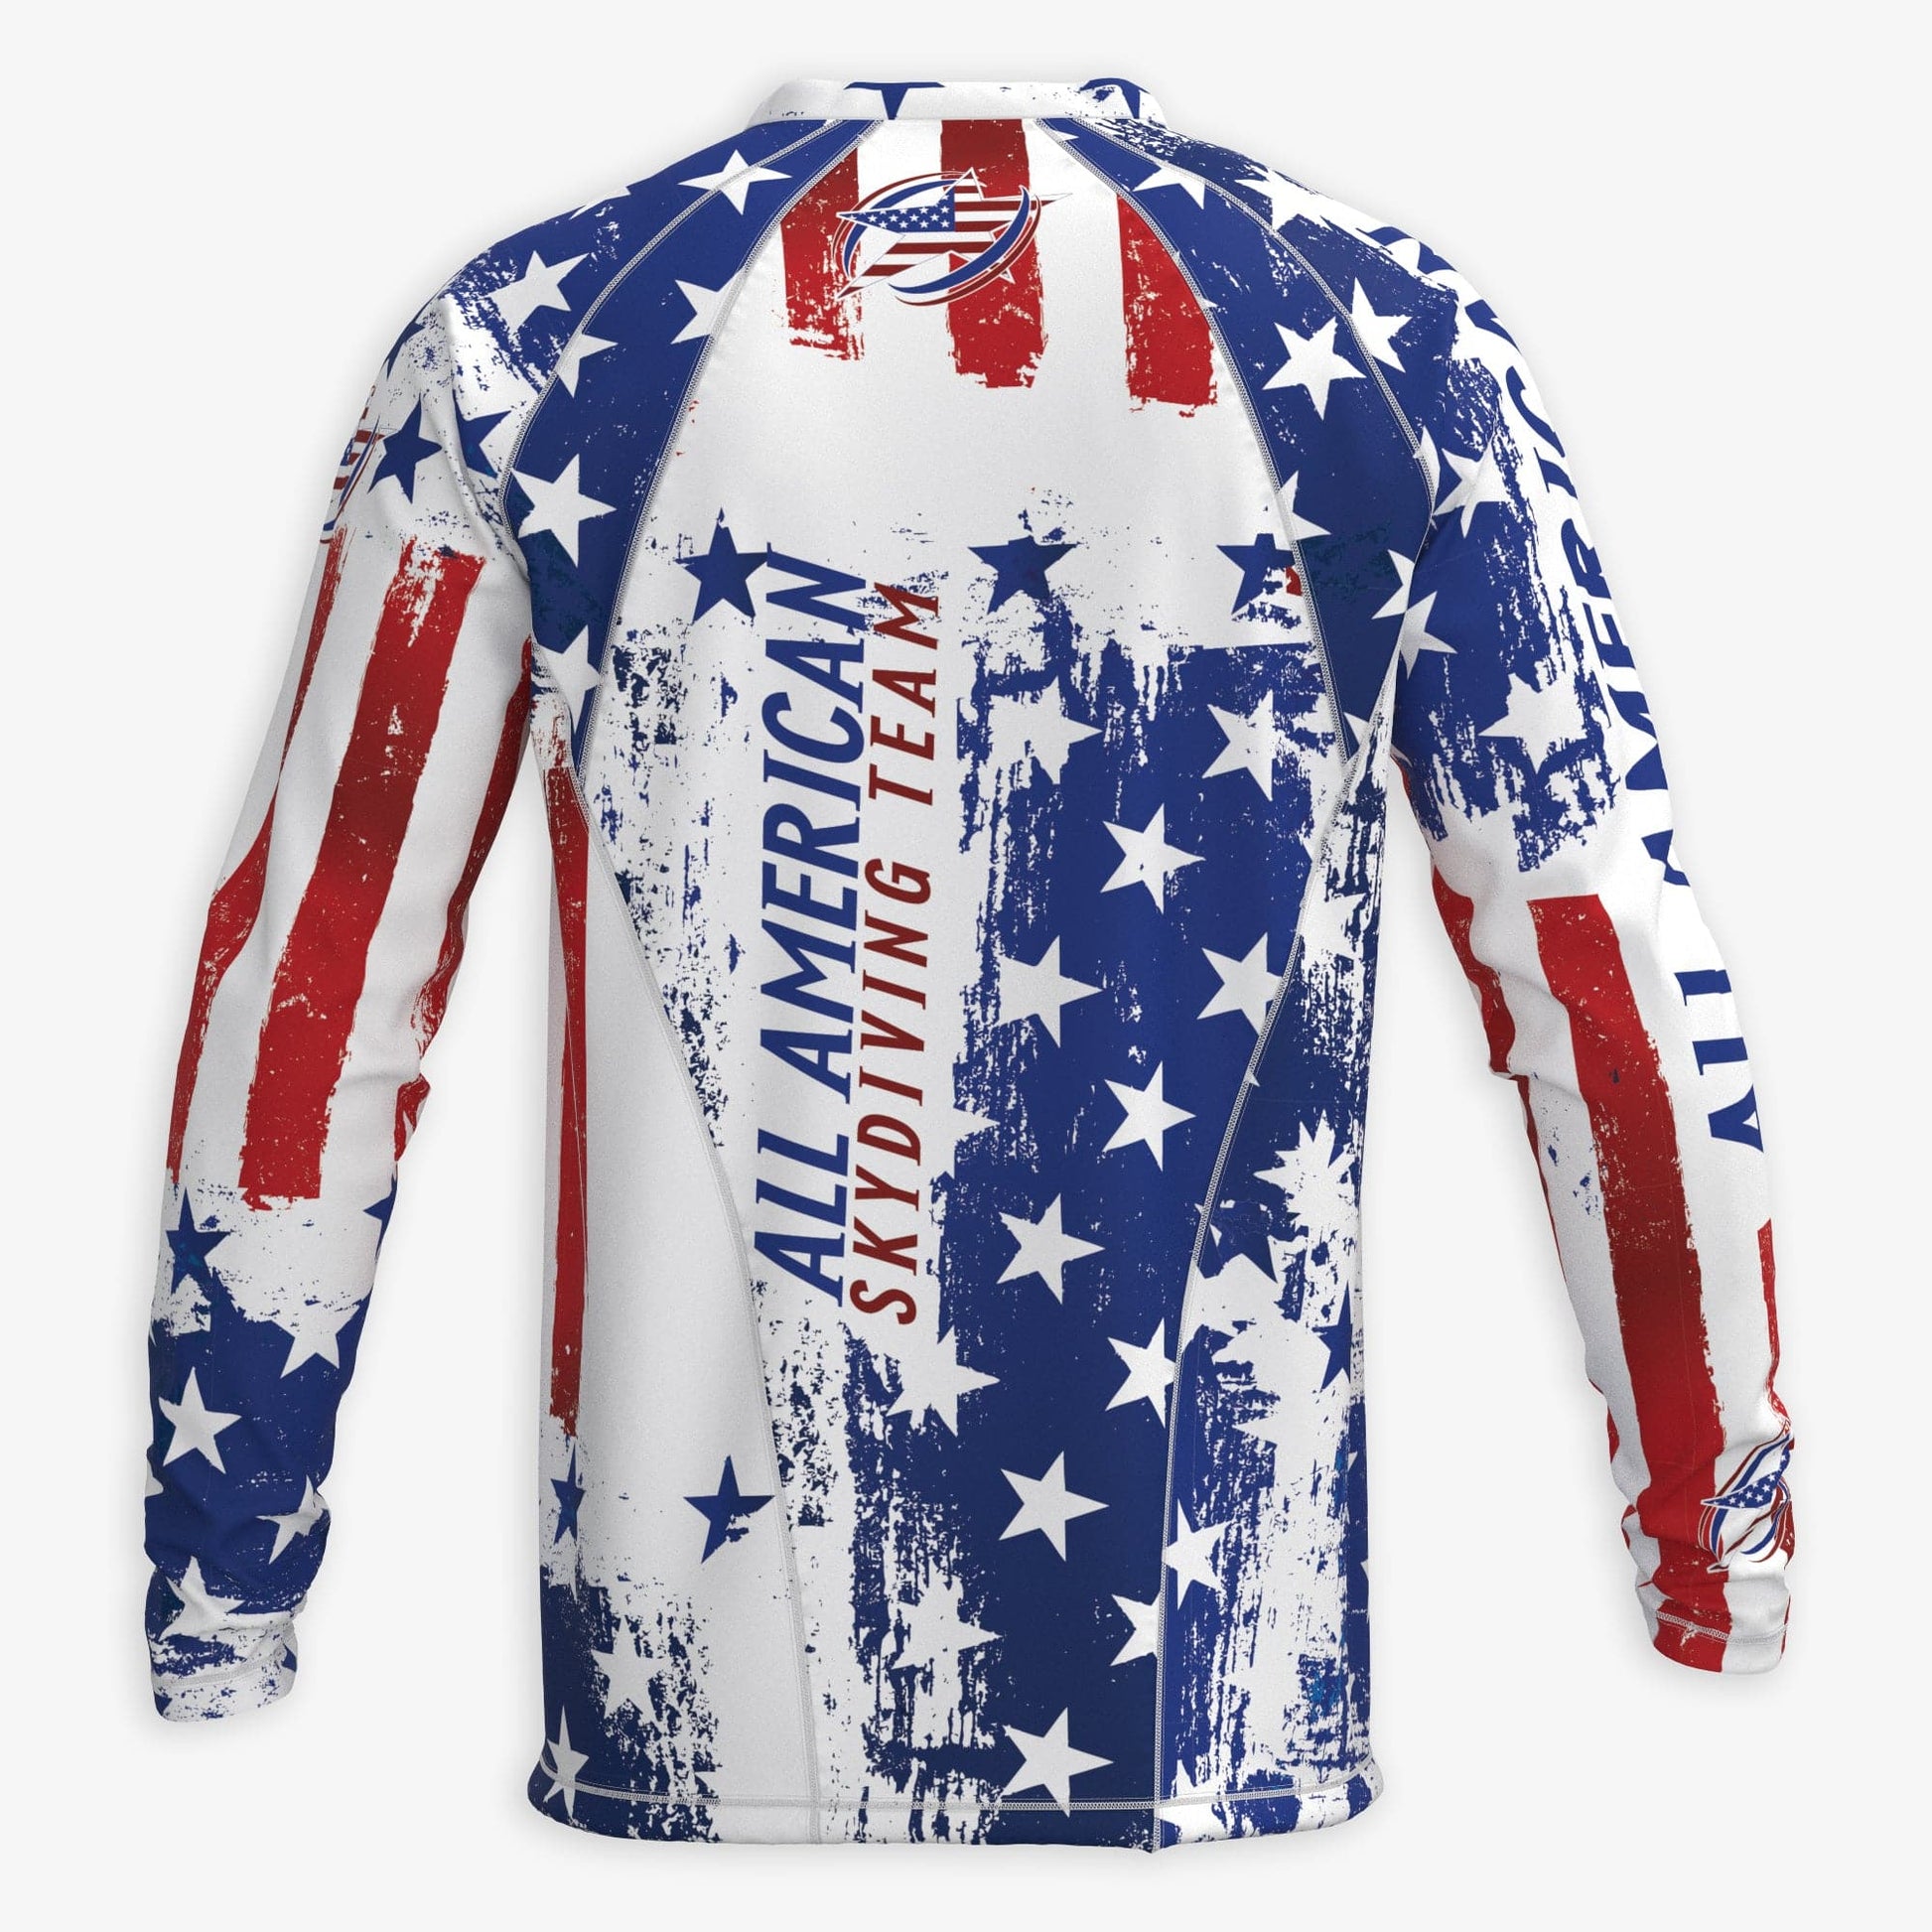 WS | All American Skydive Jersey - Manufactory Apparel - All American Skydive